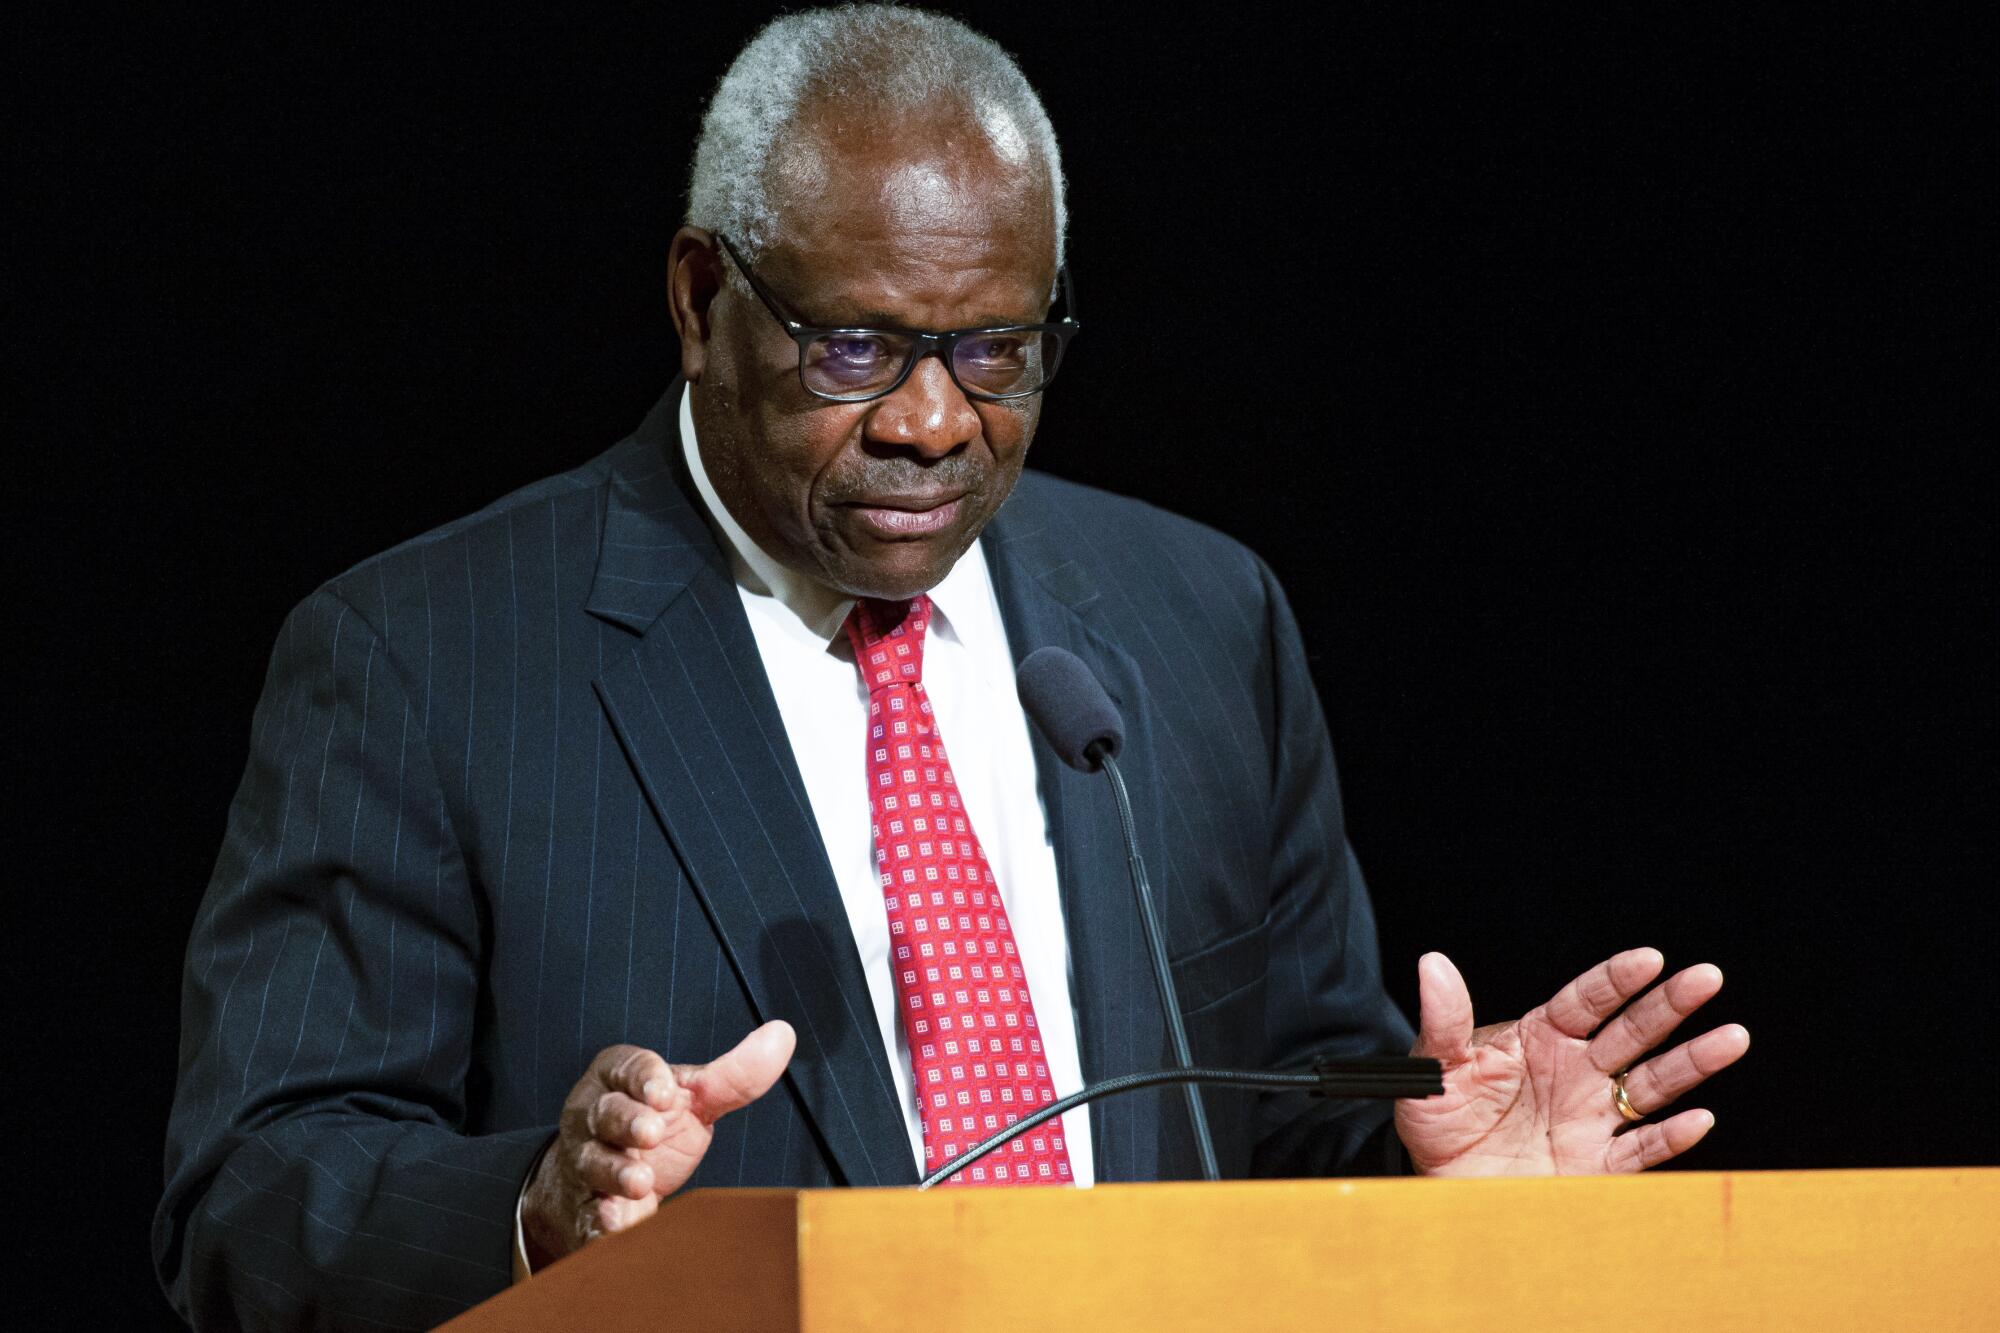  Supreme Court Justice Clarence Thomas gesturing as he speaks from a lectern